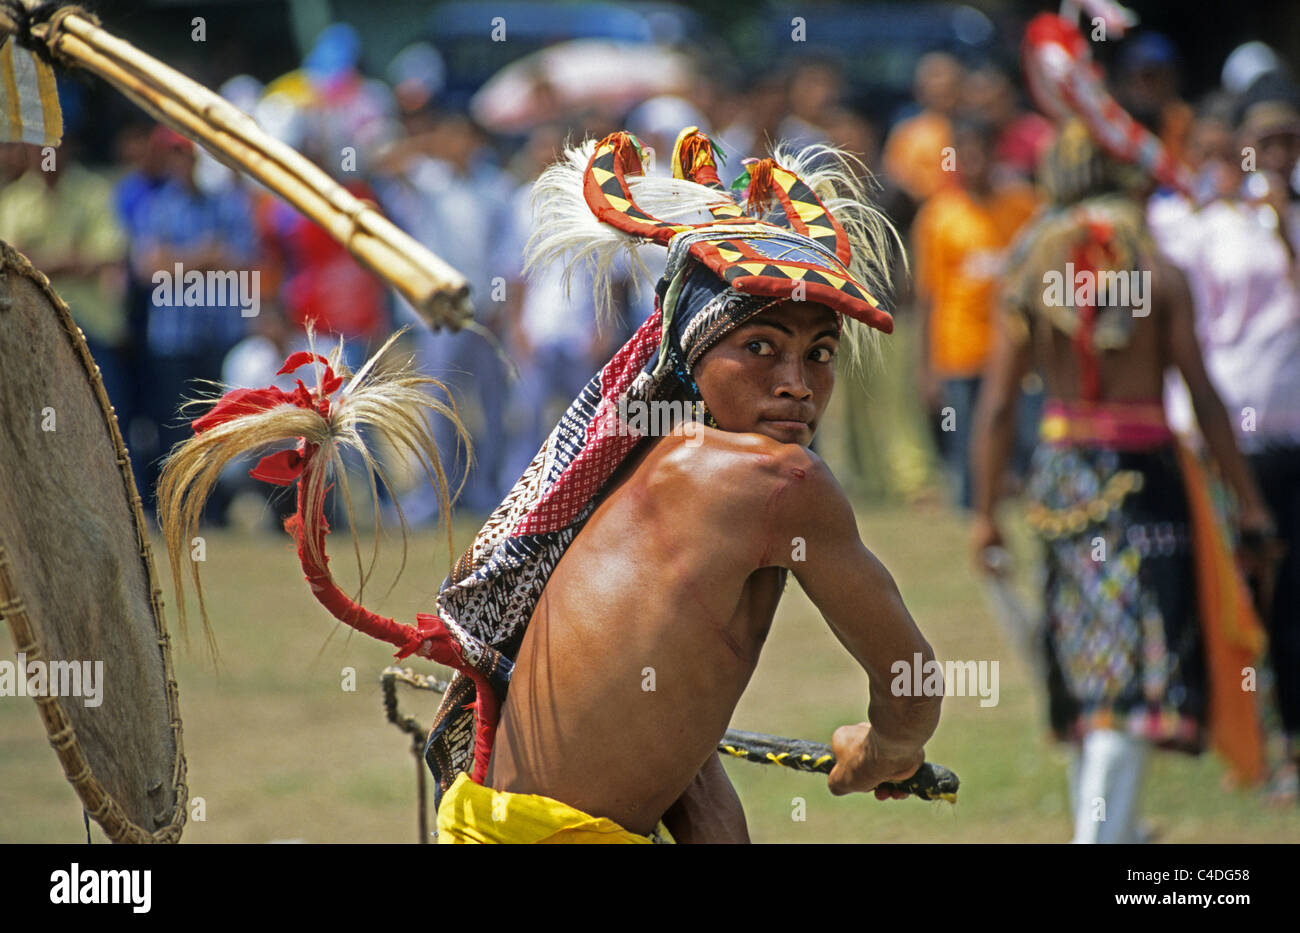 Caci whip fighting,Flores,Indonesia Stock Photo